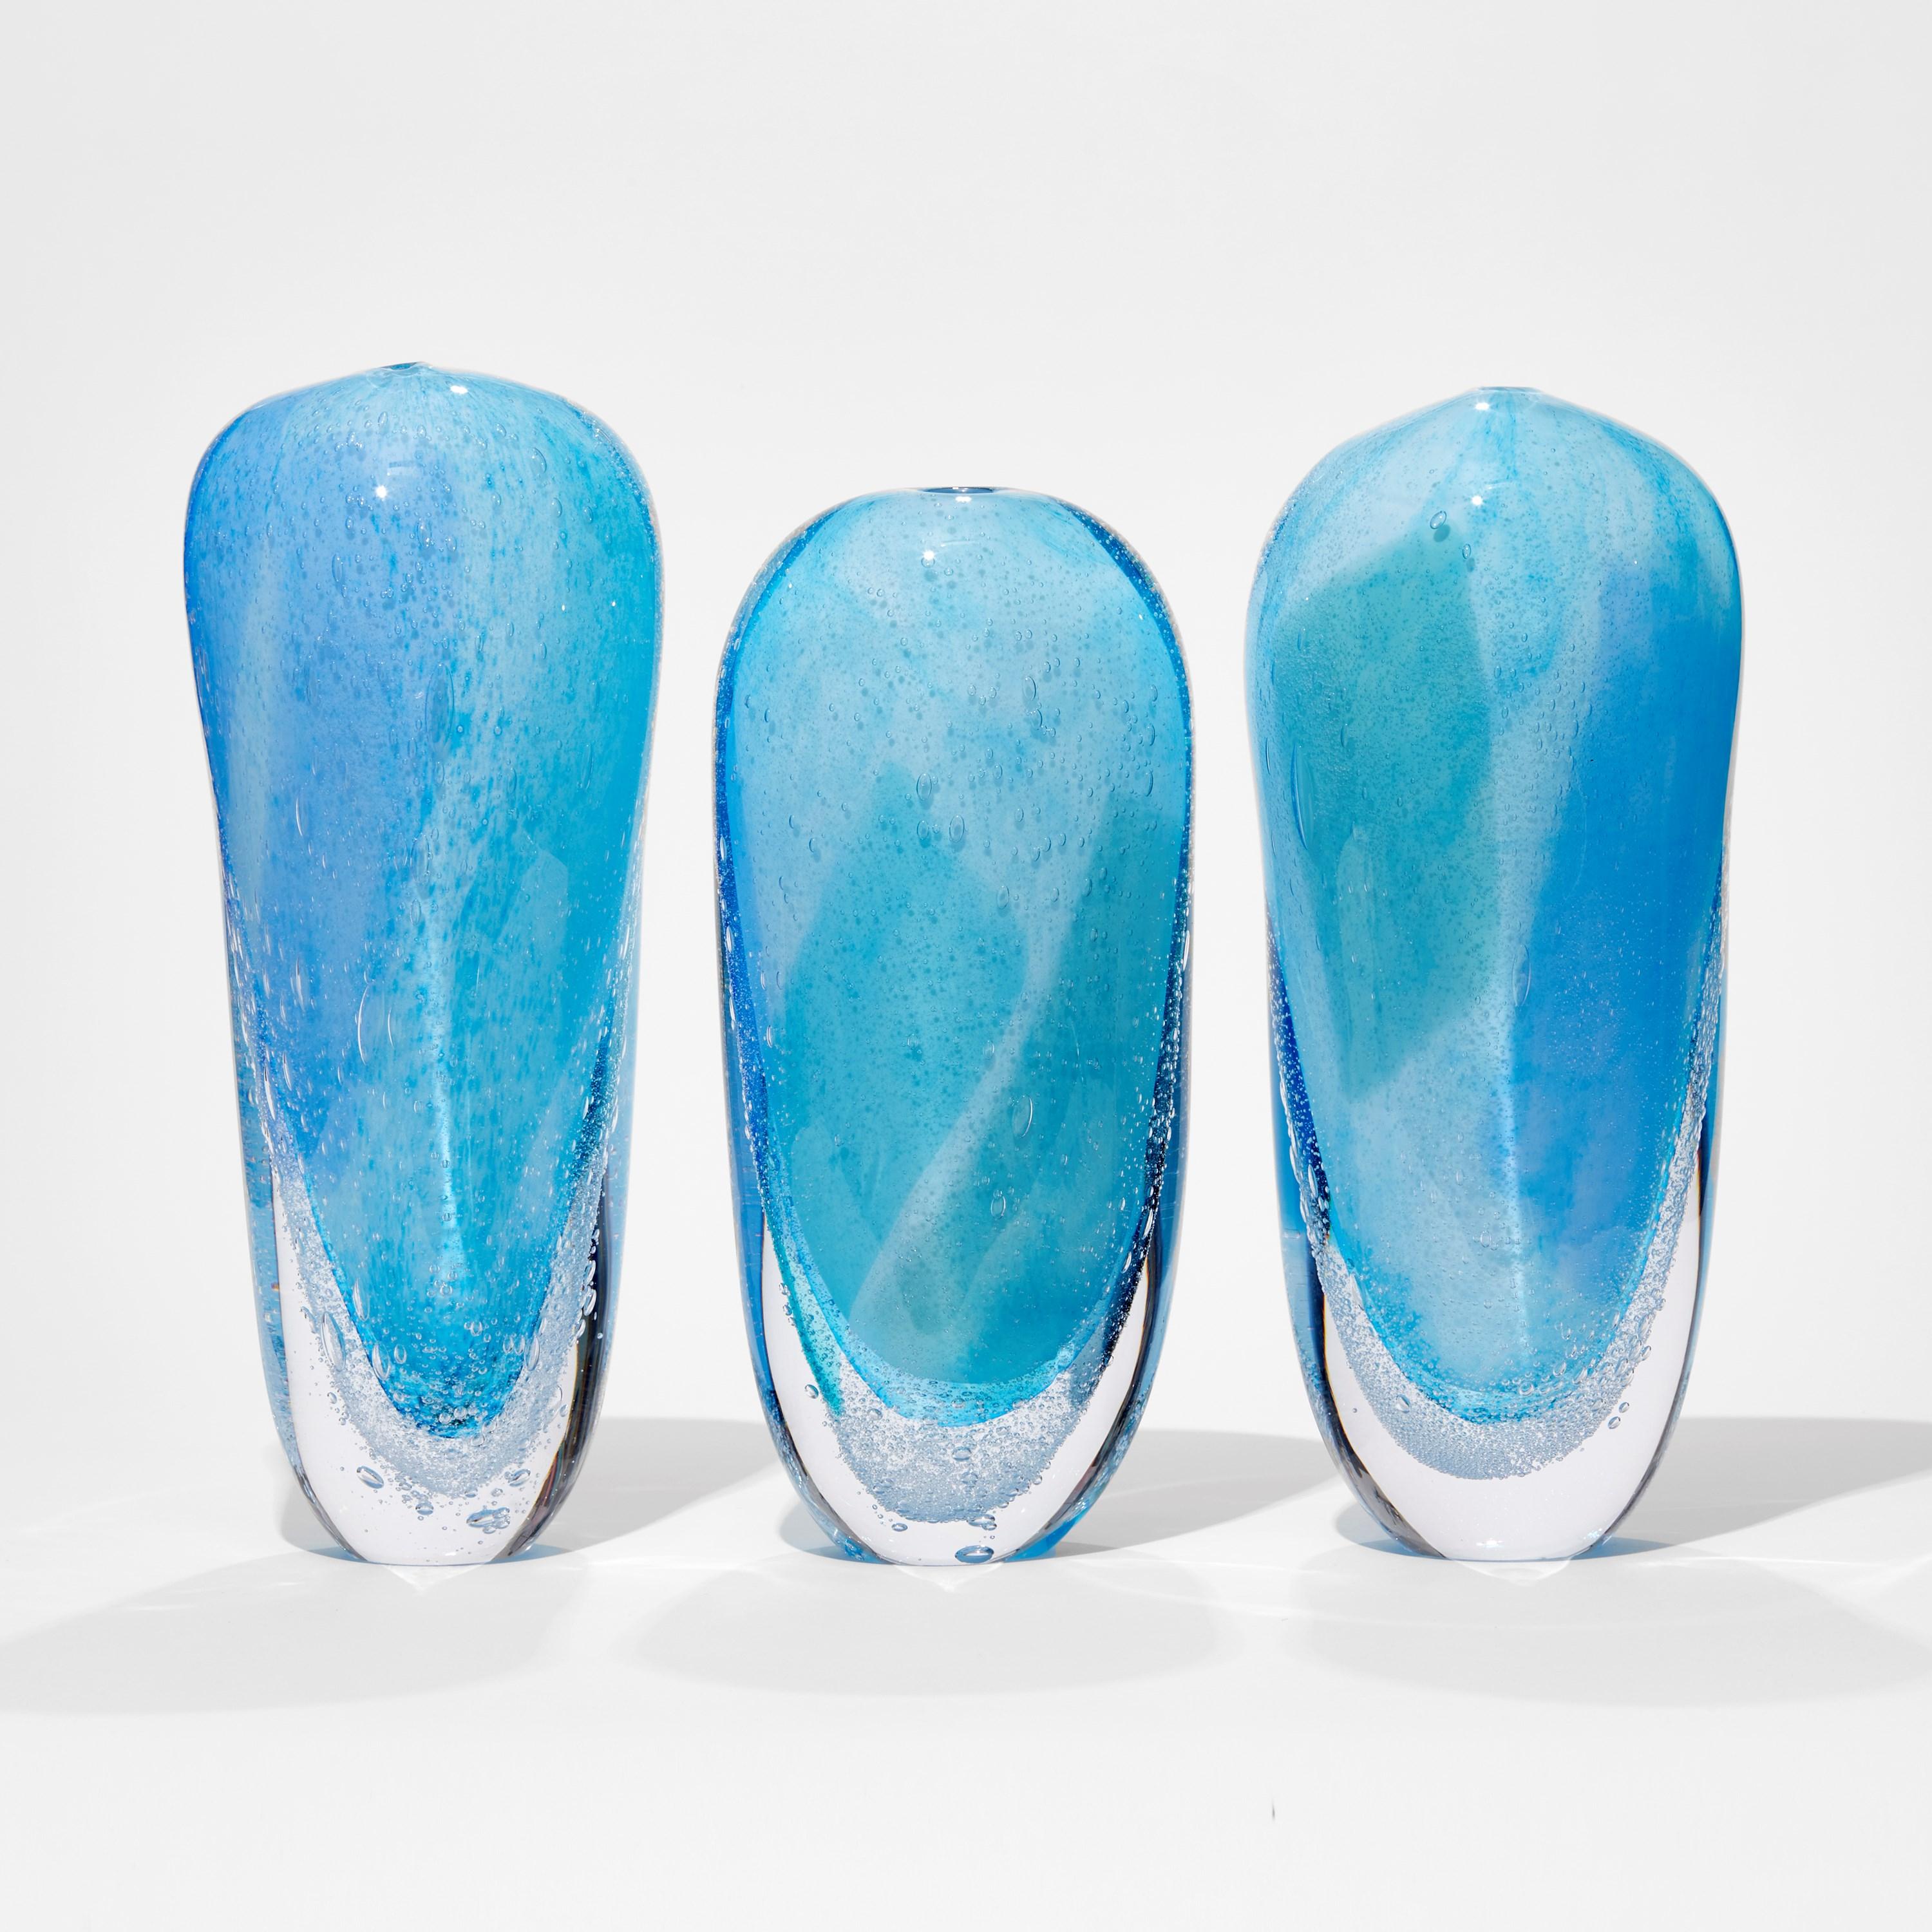 'Icebergs' is a unique set of glass sculptures by the British artist, Cathryn Shilling. 

The price shown is for the set of 3 artworks, which range in height from 33 - 37cm H. The dimensions above are for the tallest artwork in the